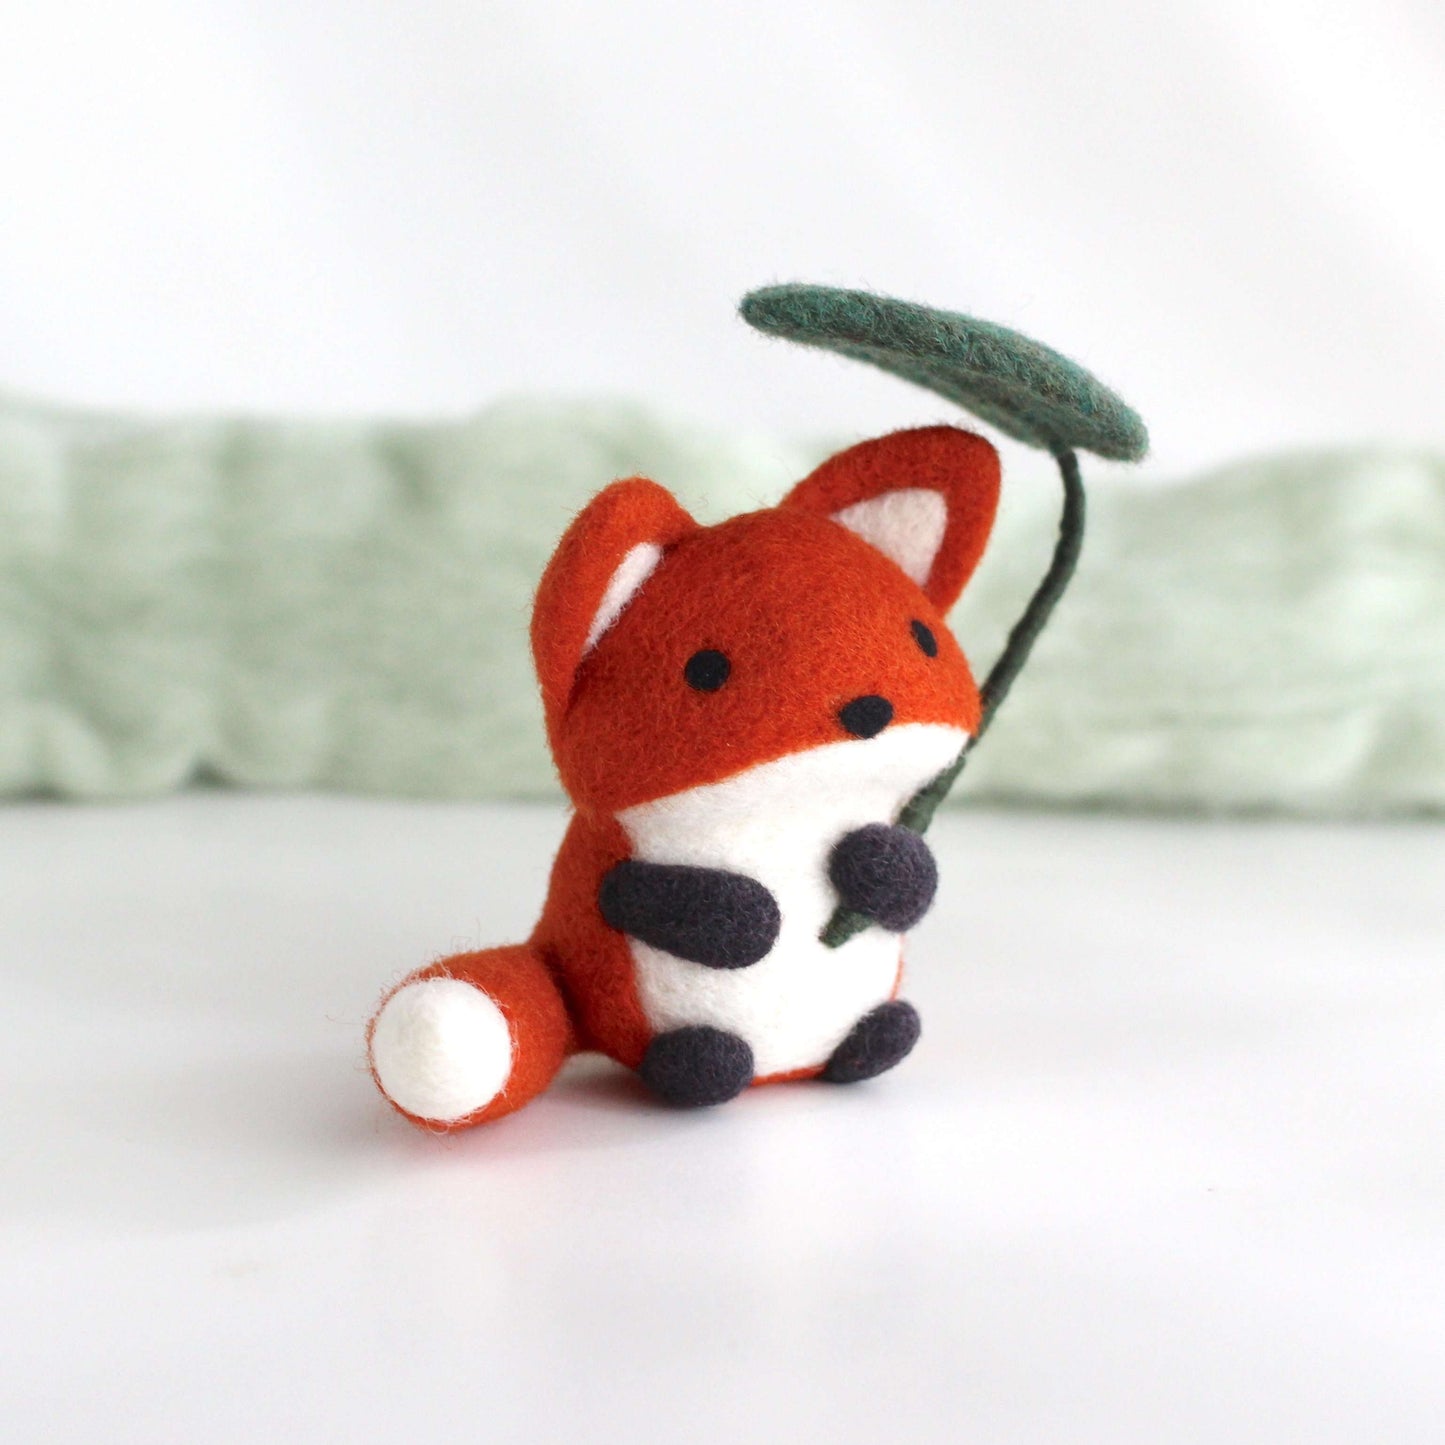 Needle Felted Fox Holding Leaf Umbrella by Wild Whimsy Woolies